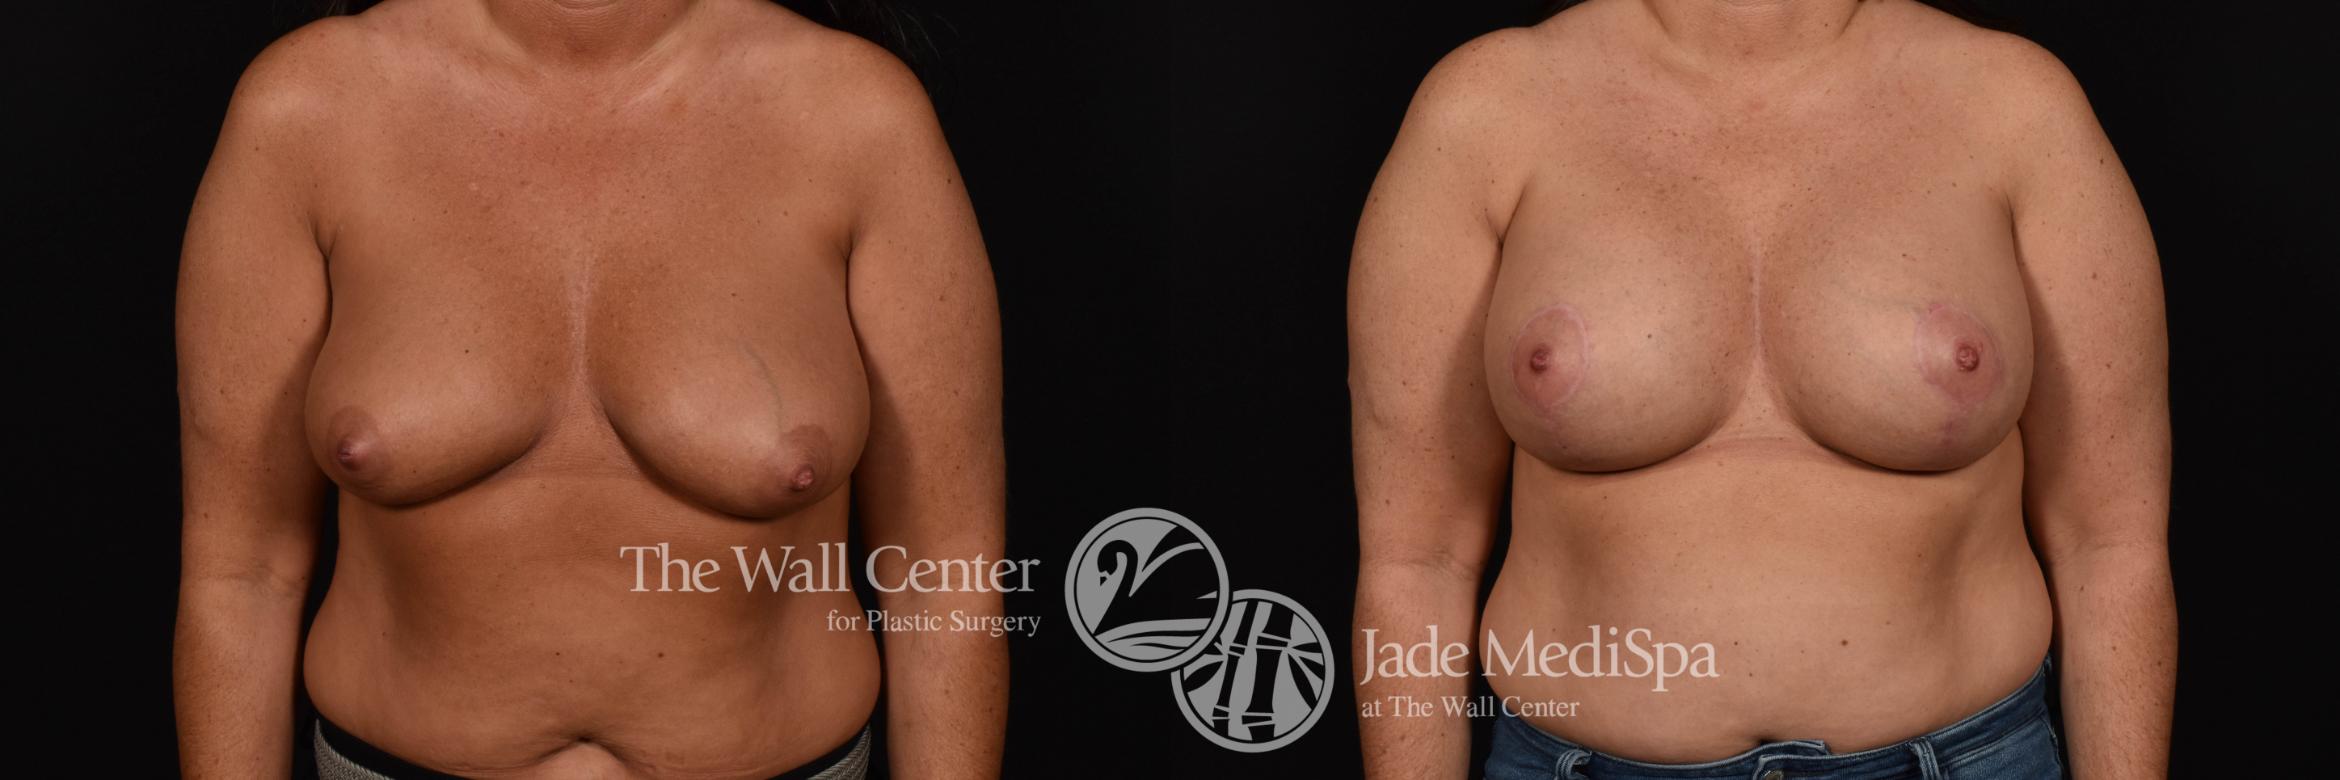 Breast Augmentation with Lift & SAFELipo Front Photo, Shreveport, Louisiana, The Wall Center for Plastic Surgery, Case 957